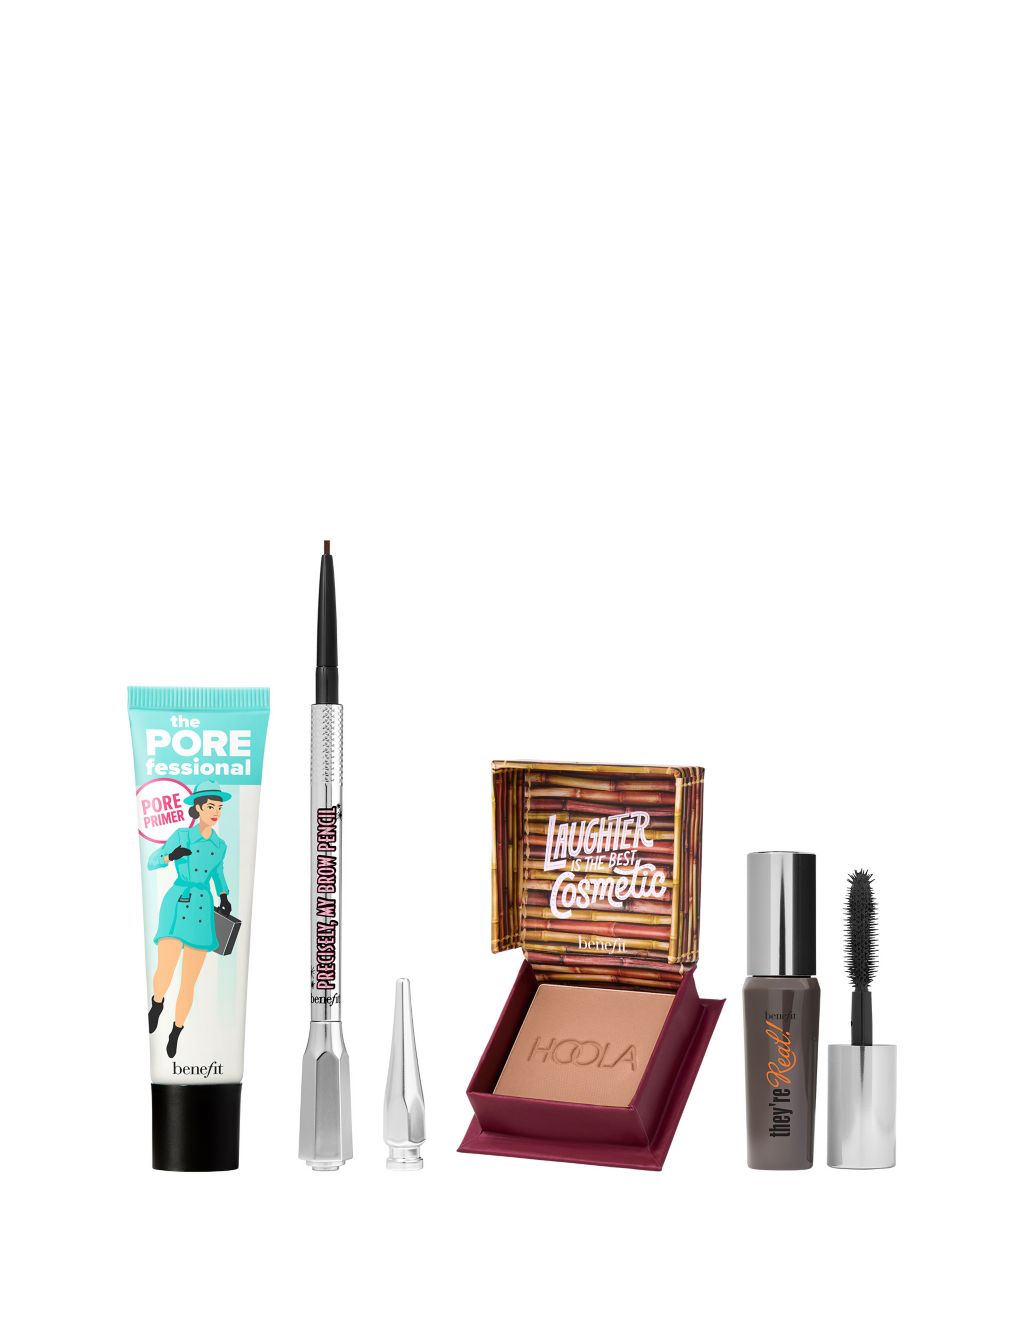 Giftin Goodies They're Real Mascara, Hoola Bronzer, Porefessional Primer & Precisely My Brow Pencil Gift Set (Worth £84.50) 6 of 7